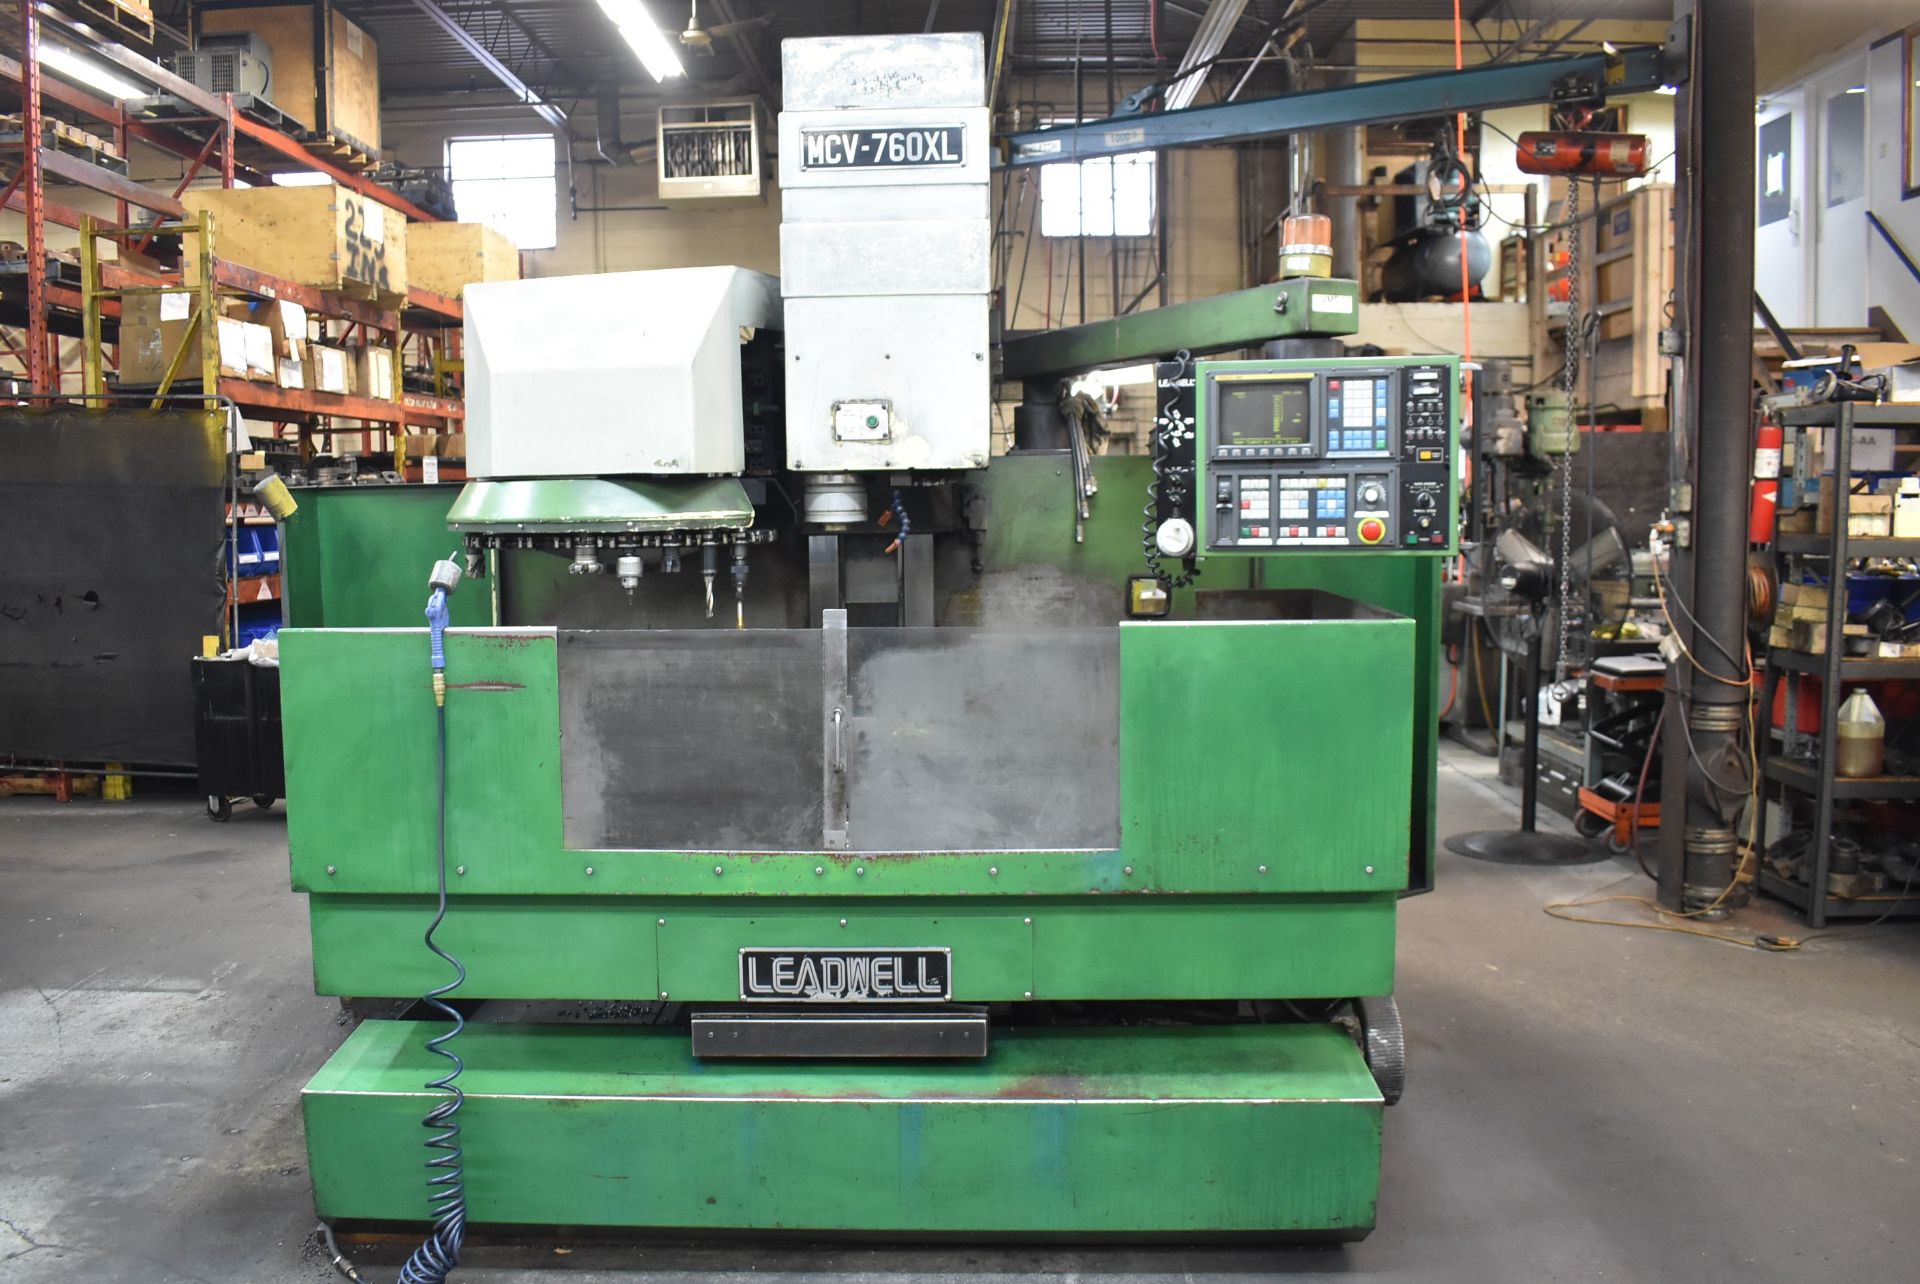 LEADWELL MCV-760XL CNC VERTICAL MACHINING CENTER WITH FANUC OM CNC CONTROL, 19.5" X 39" T-SLOT - Image 6 of 6